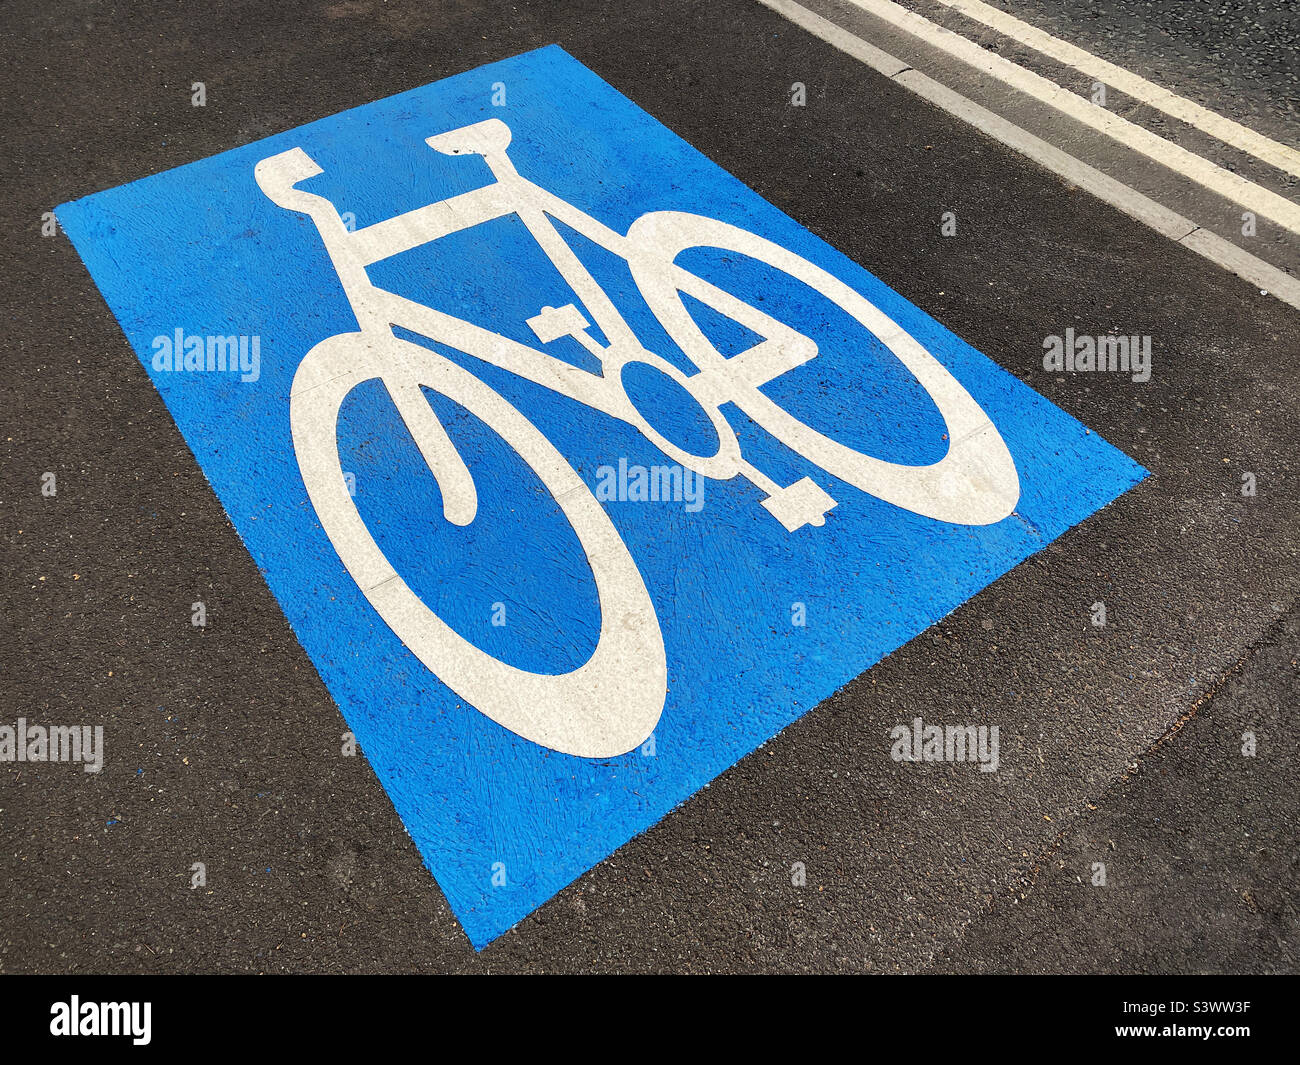 A blue and white graphic sign indicating this area is a cycle lane. Photo ©️ COLIN HOSKINS. Stock Photo